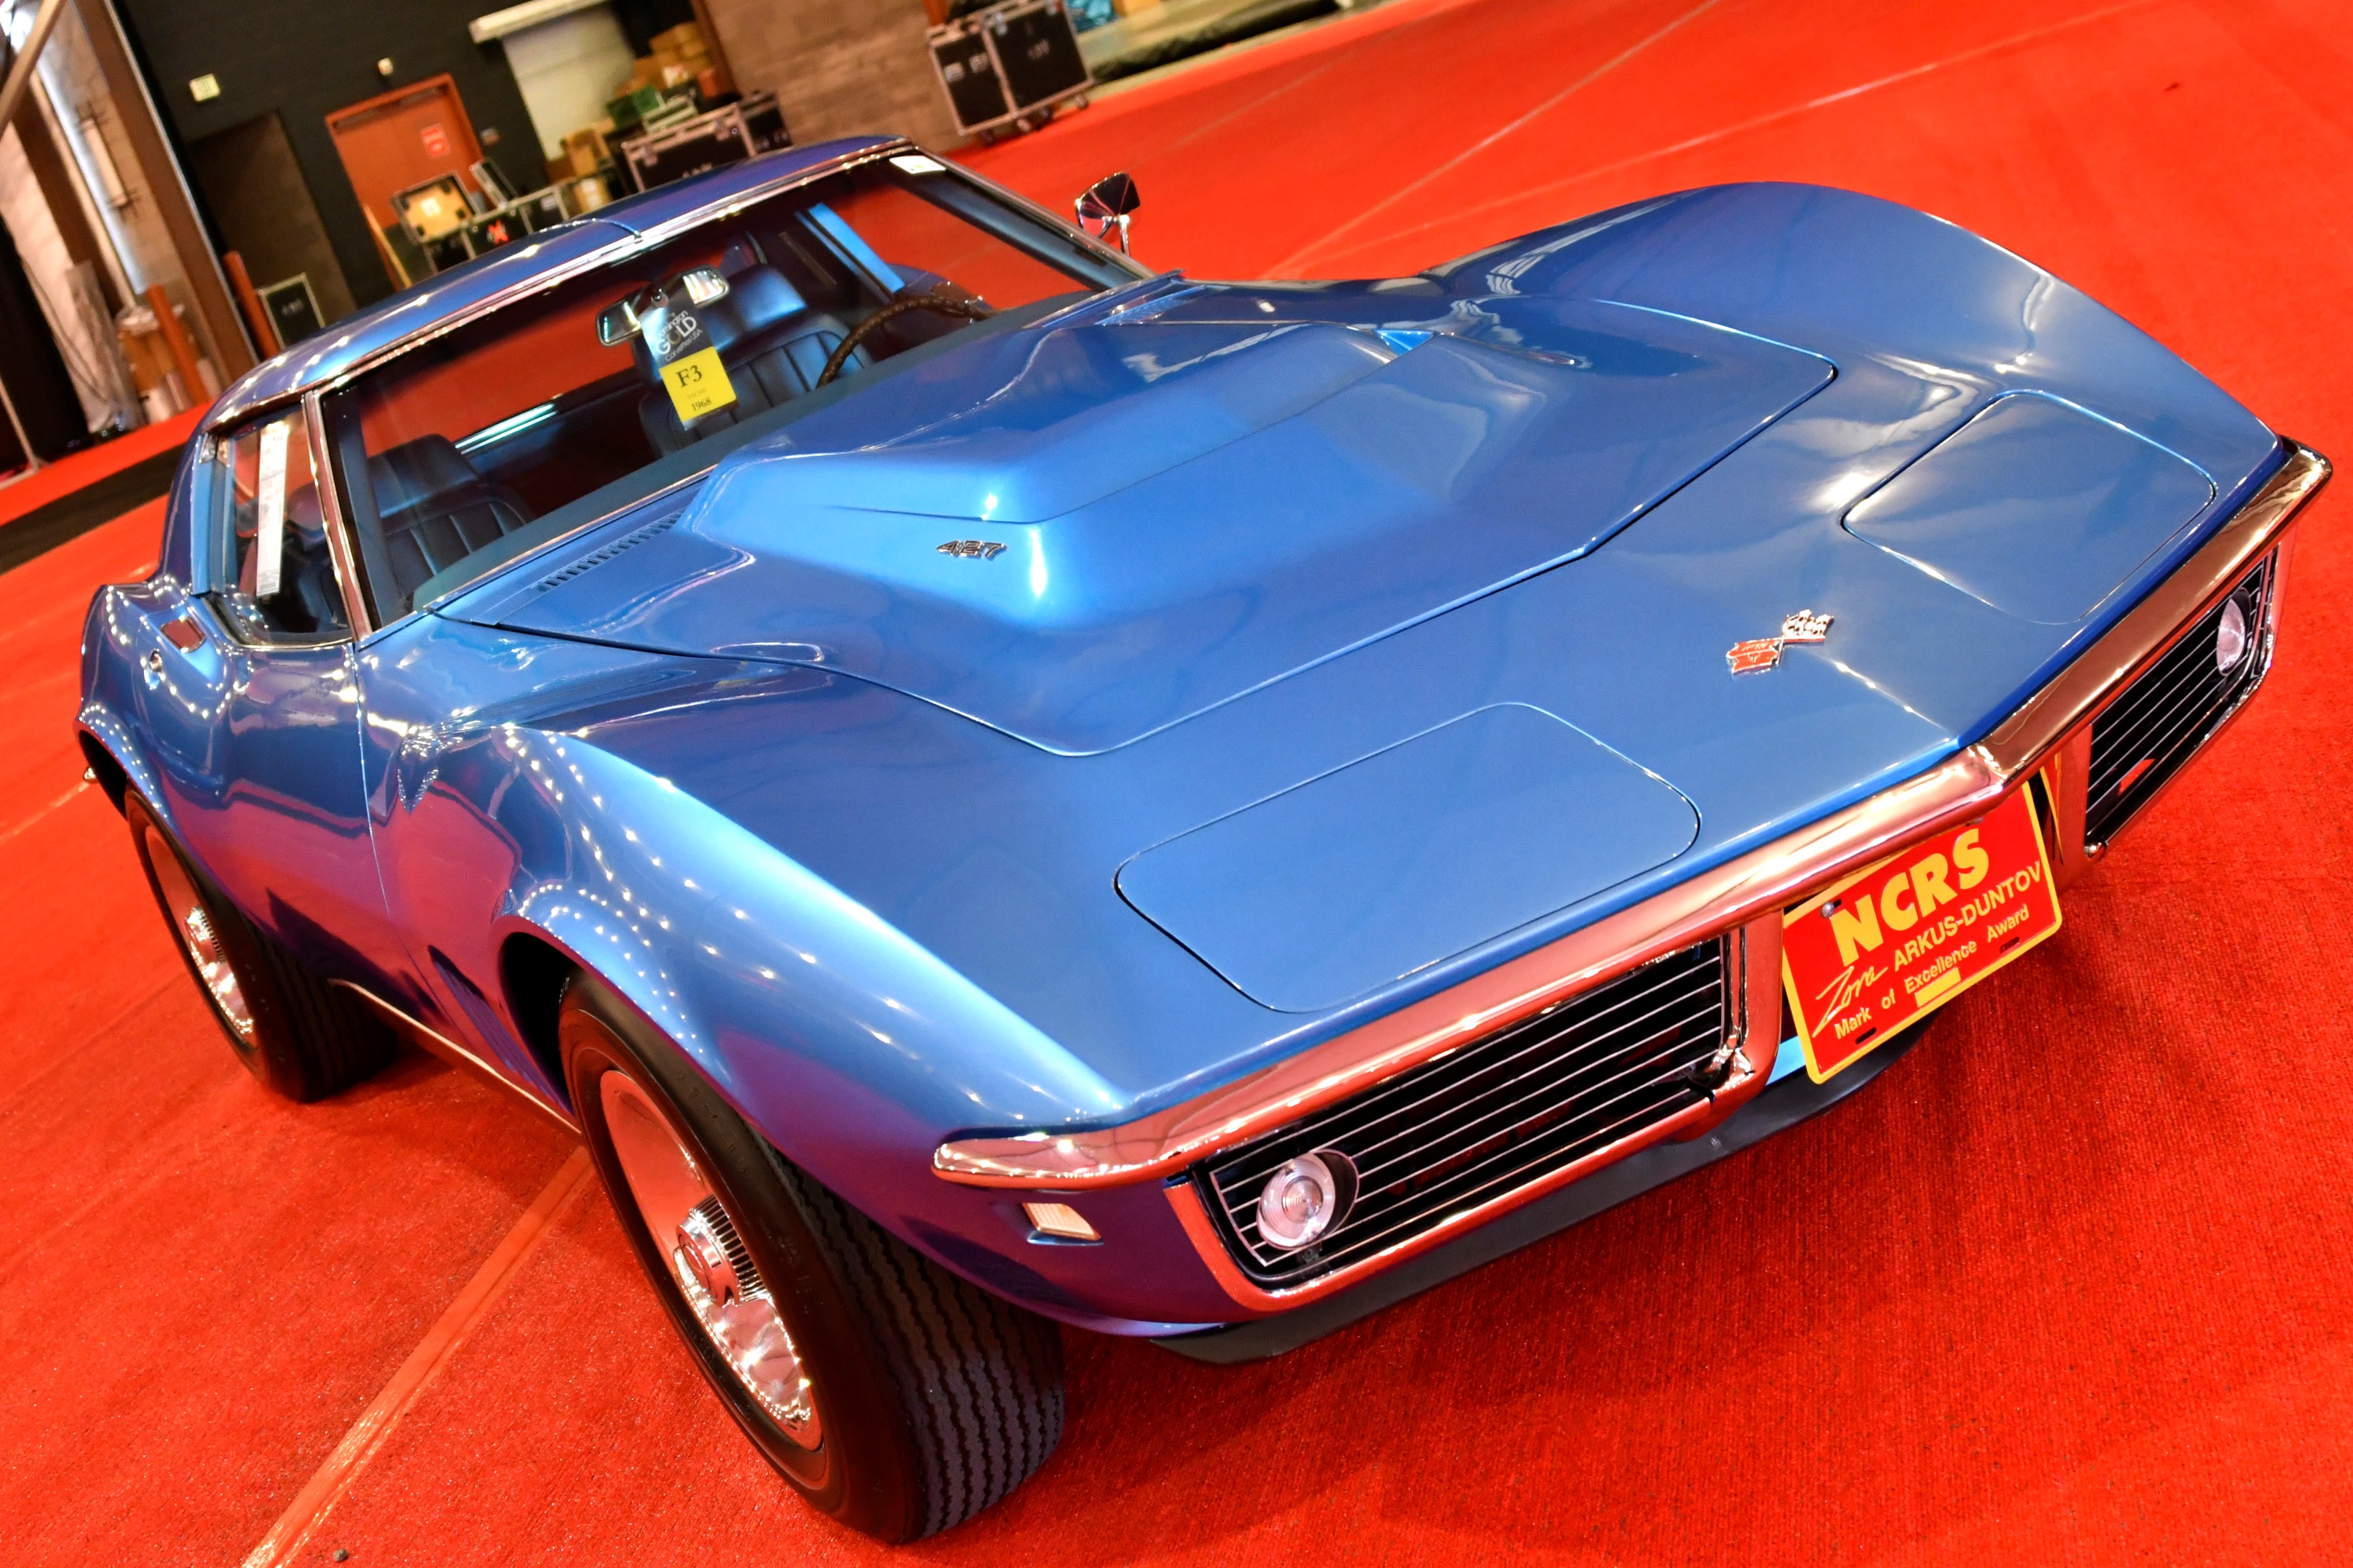 , Top-dog muscle cars ready for action at Barrett-Jackson in Scottsdale, ClassicCars.com Journal